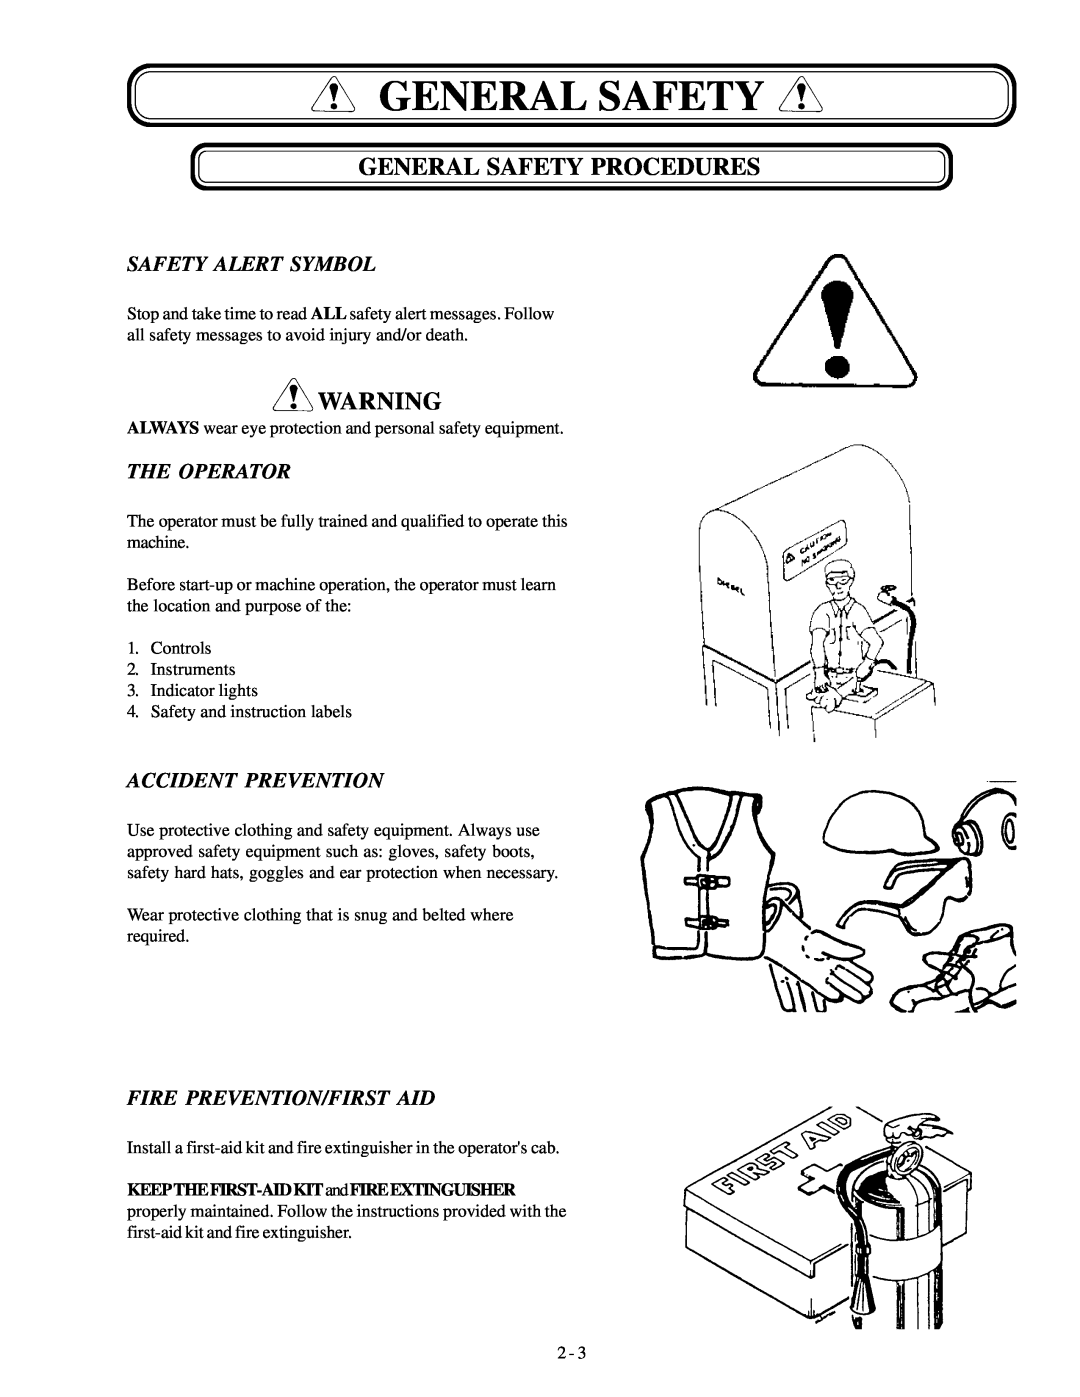 Genie GTH-636 manual General Safety Procedures, Safety Alert Symbol, The Operator, Accident Prevention 